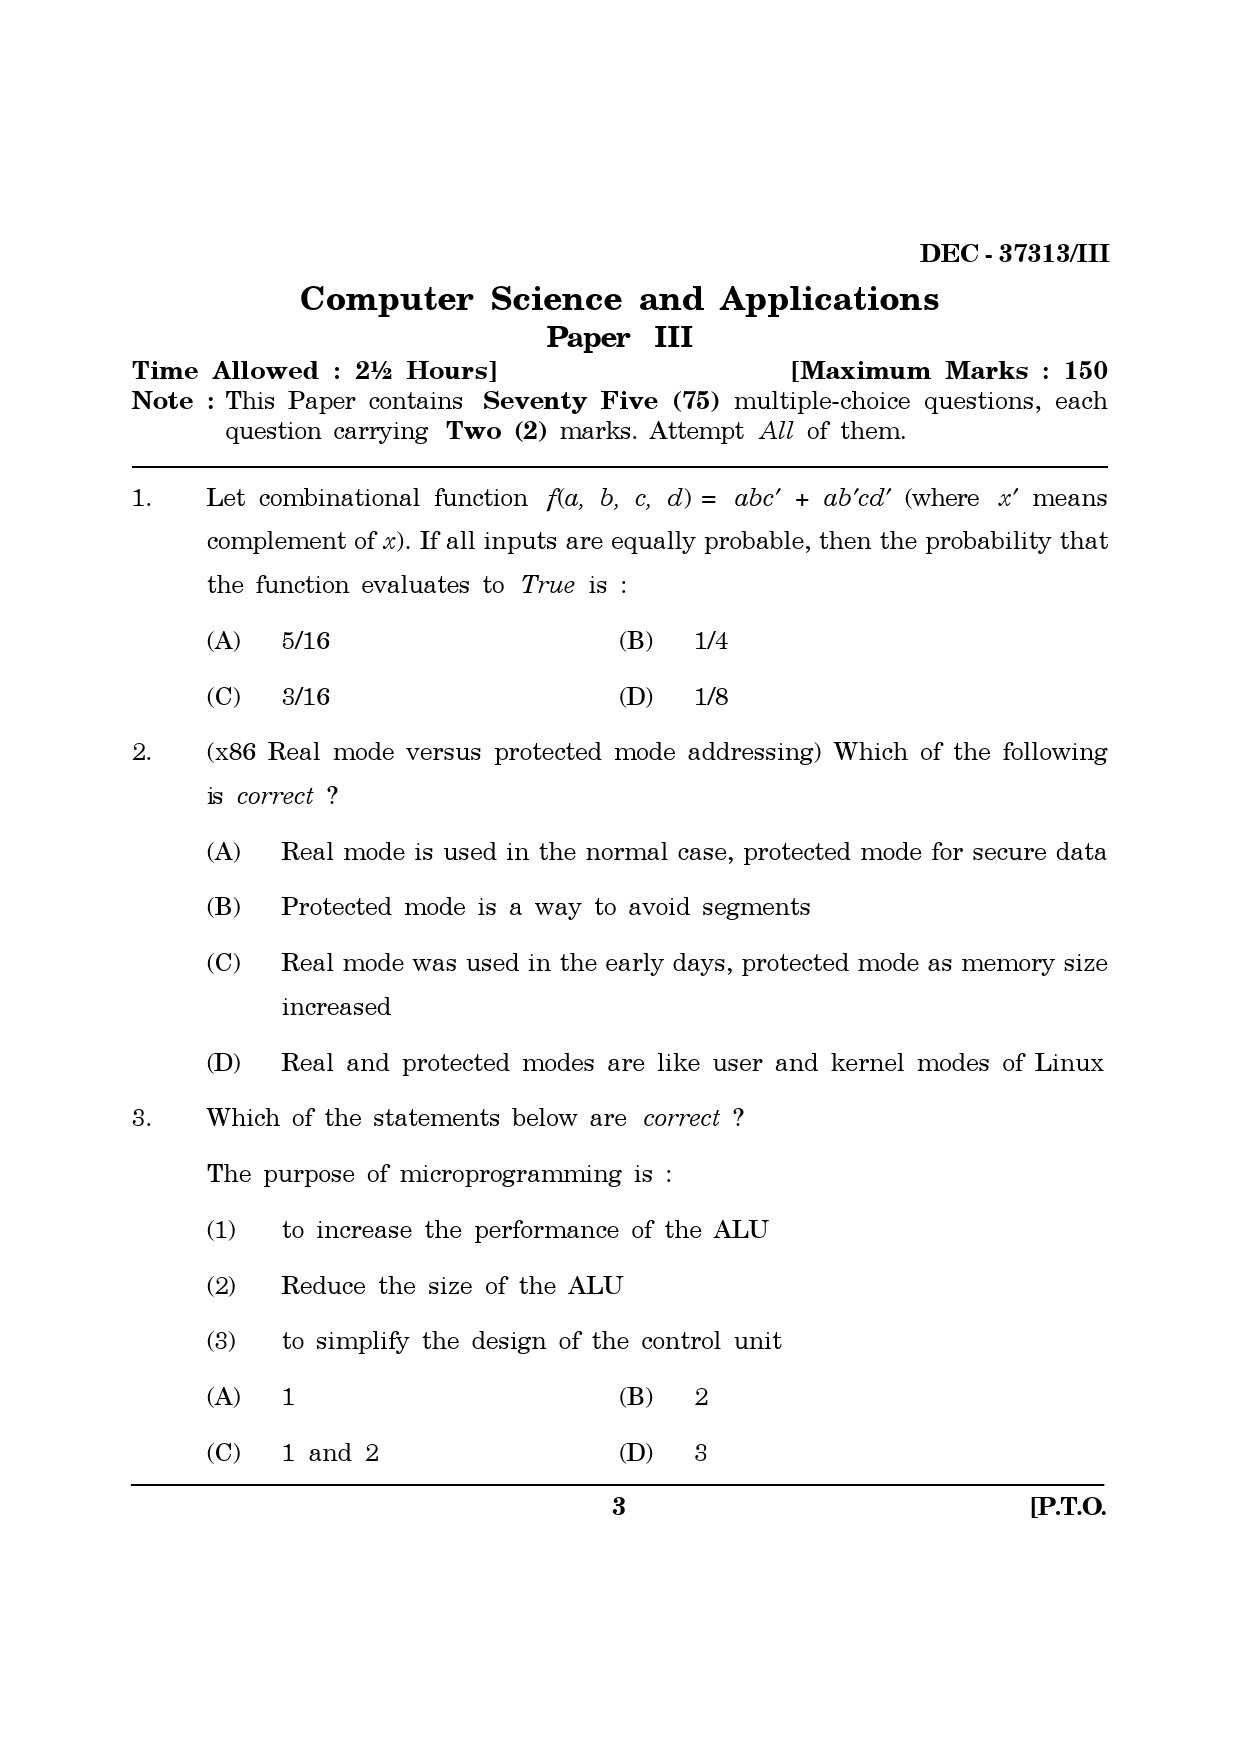 Maharashtra SET Computer Science and Application Question Paper III December 2013 2